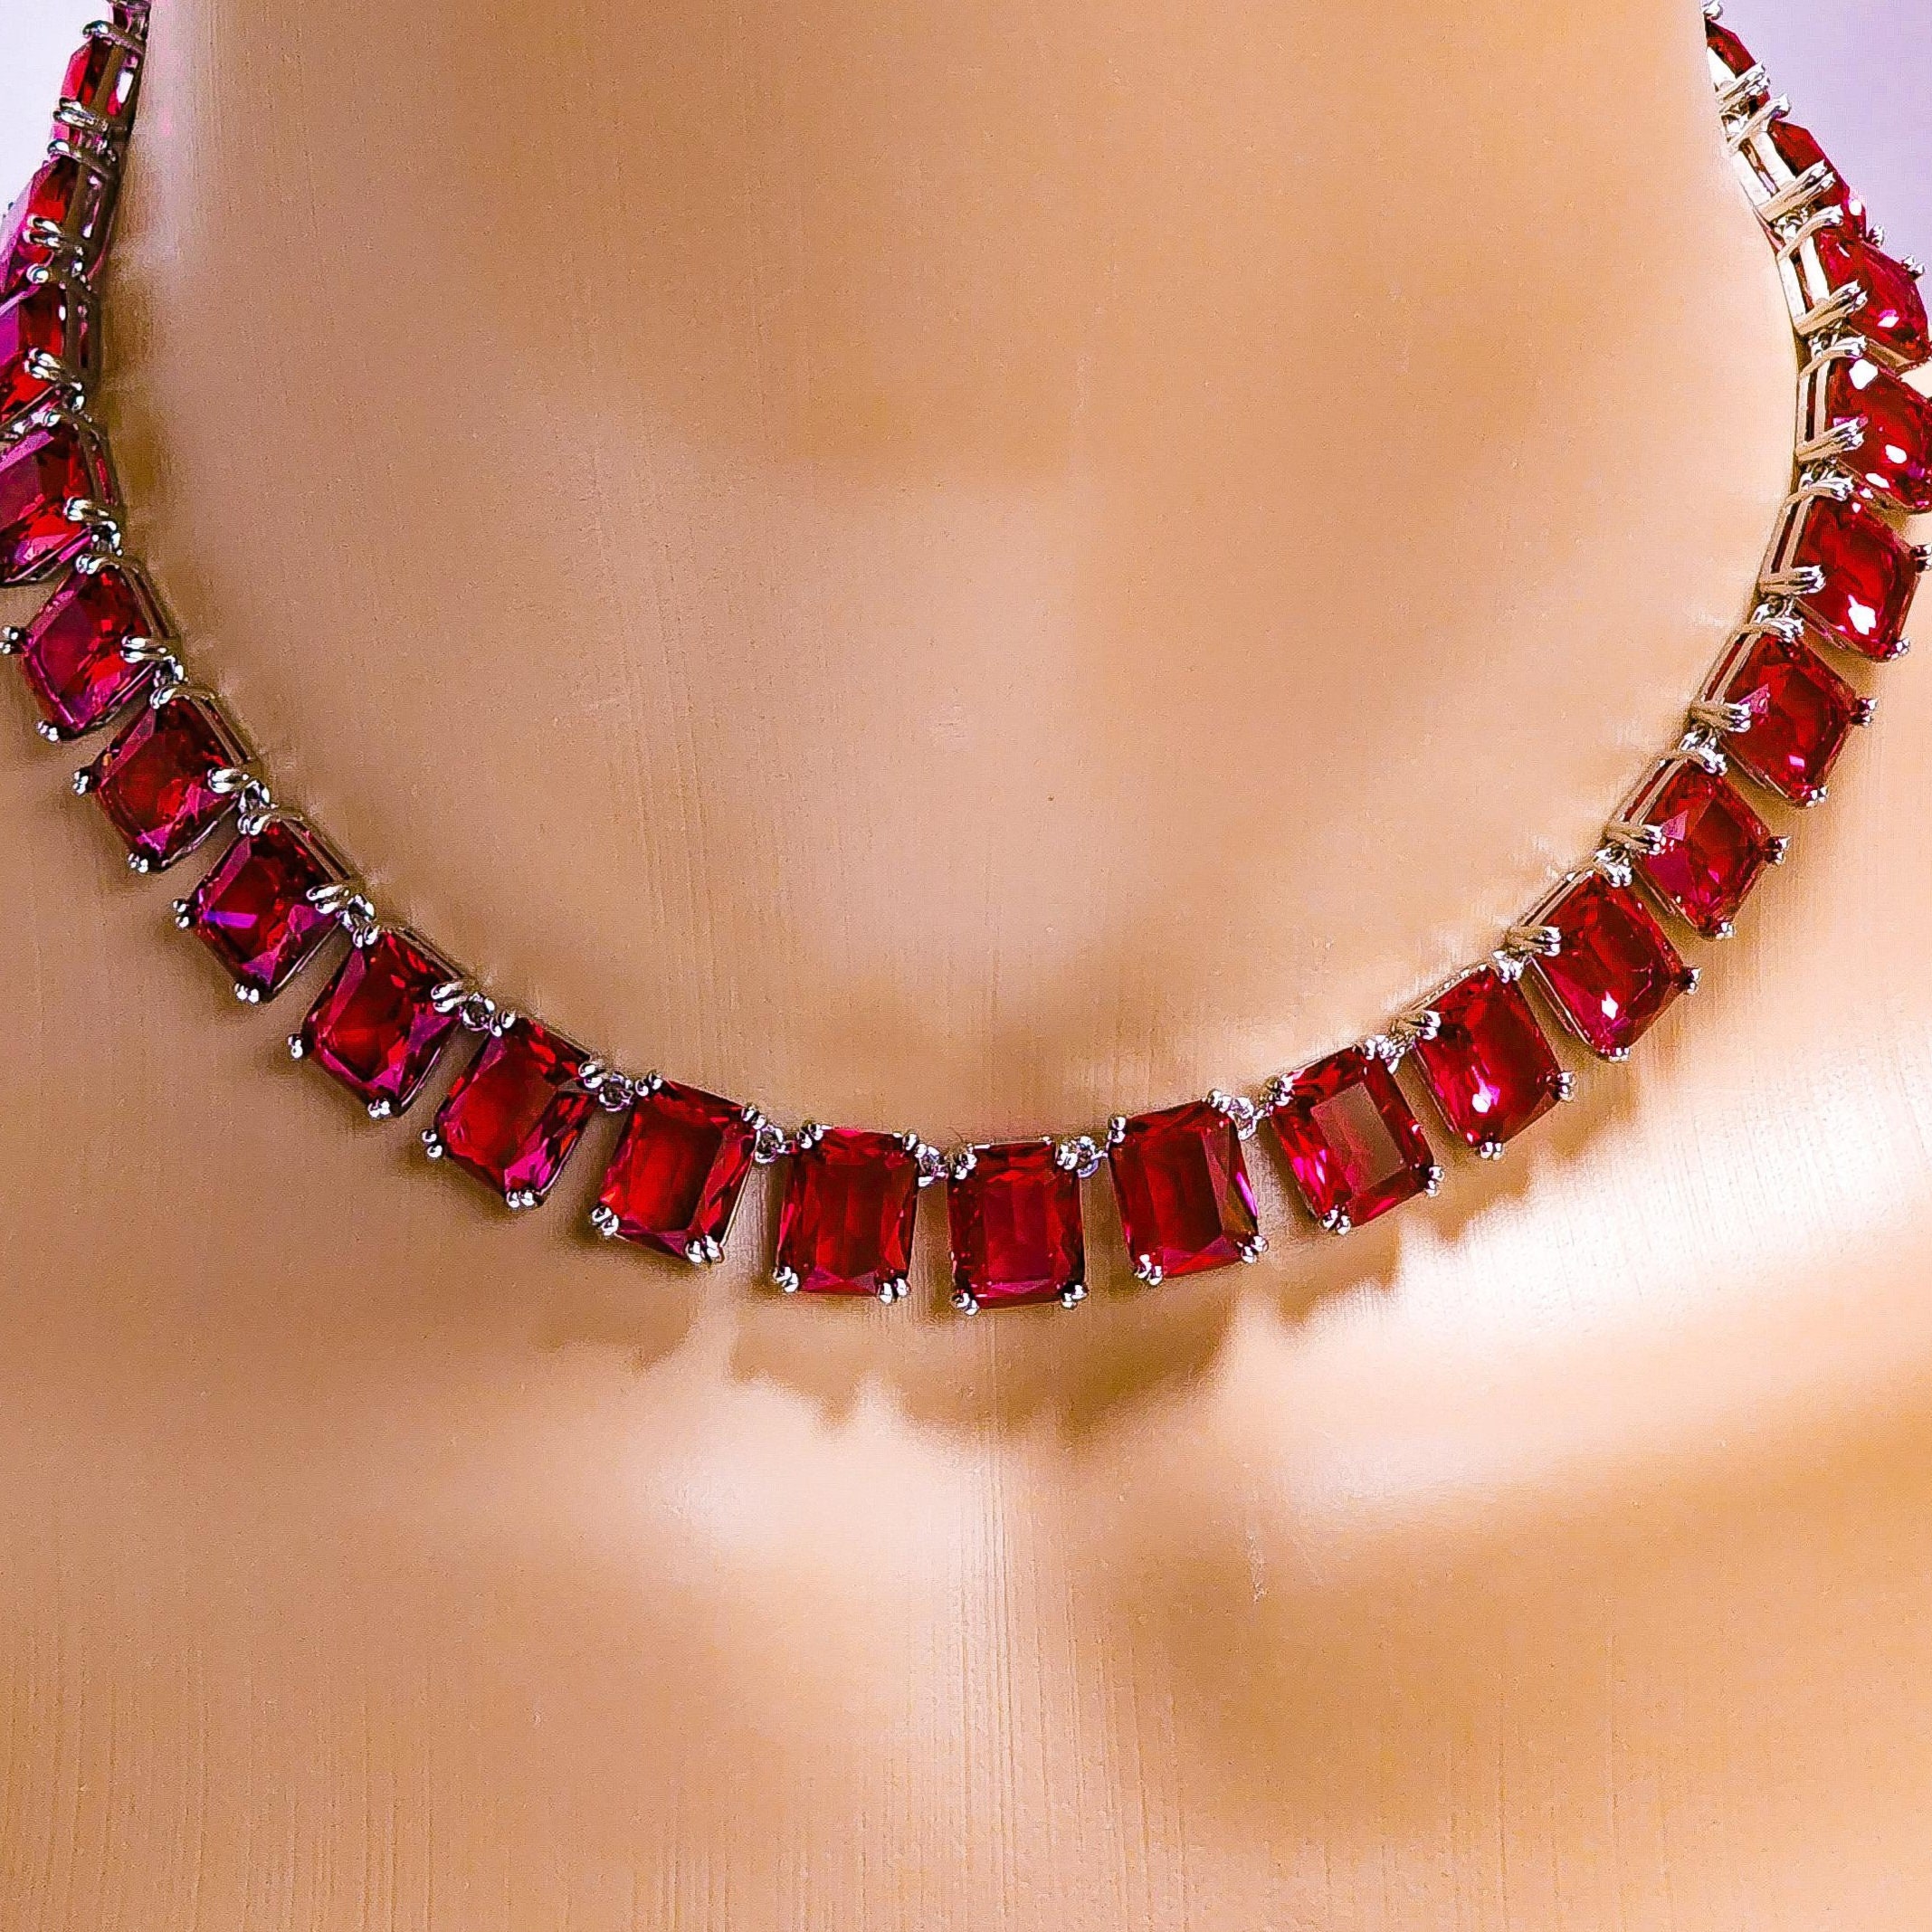 Red Crystal Necklace, Ruby Color Bead Link Necklace, 14K Gold Fill Delicate Chain, Swarovski Crystal, Red and Gold Formal Crystal Jewelry